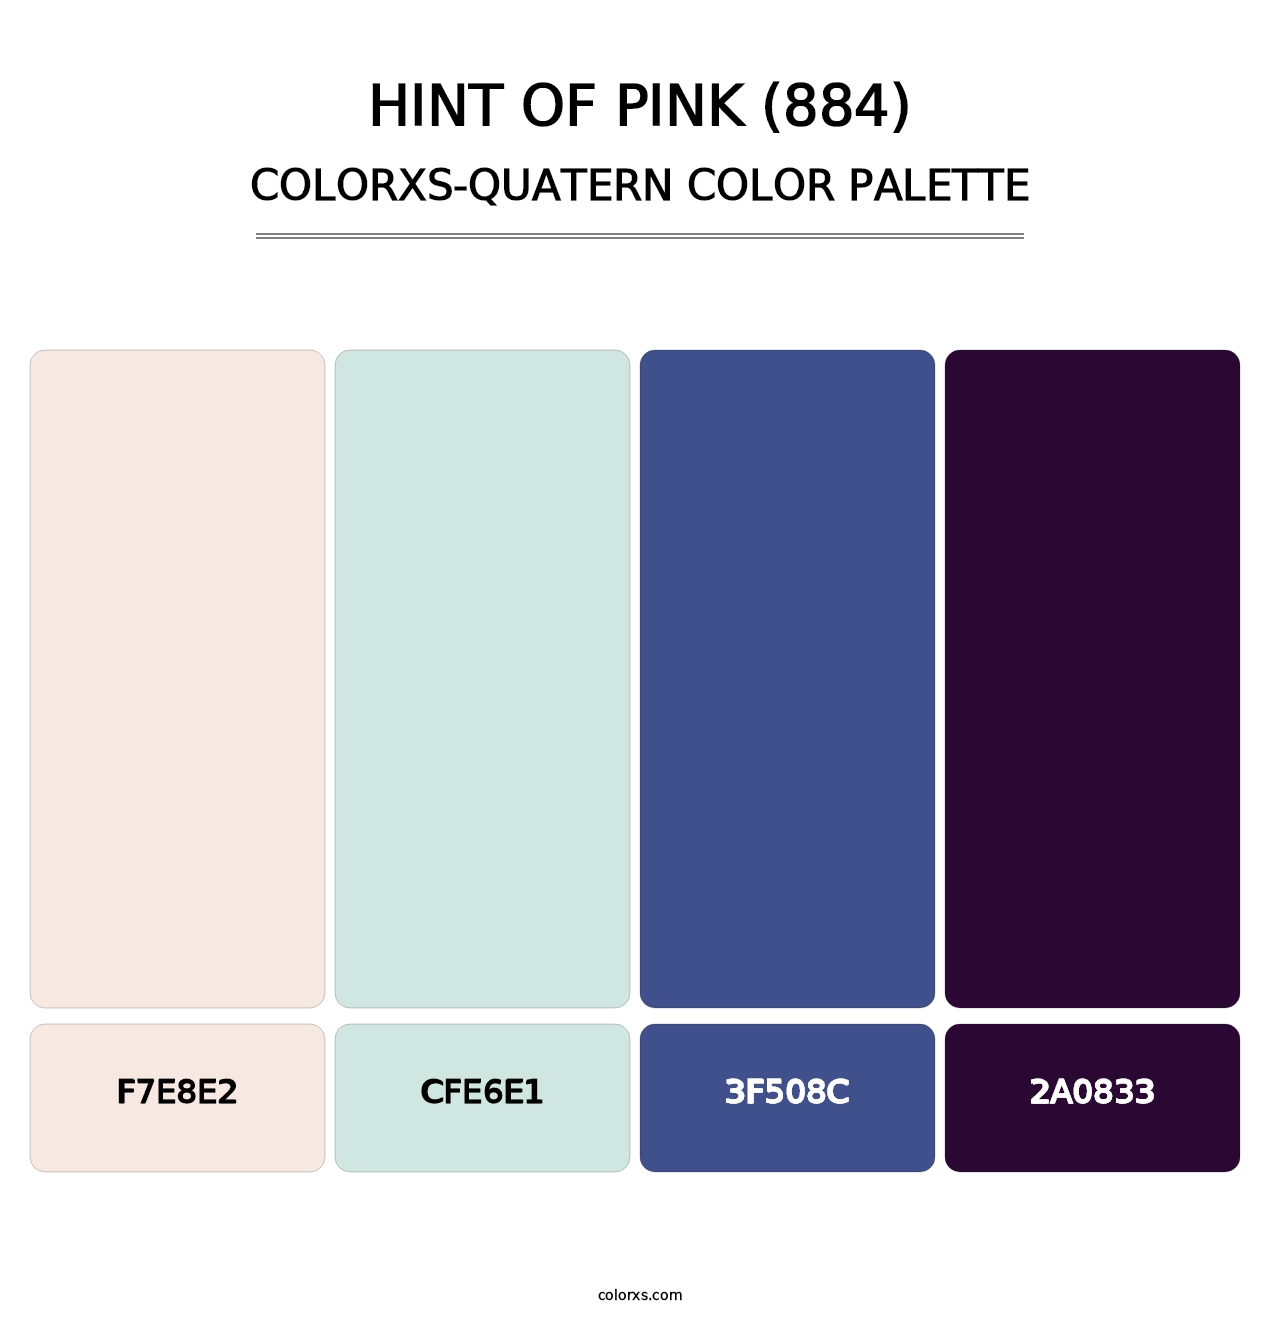 Hint of Pink (884) - Colorxs Quatern Palette